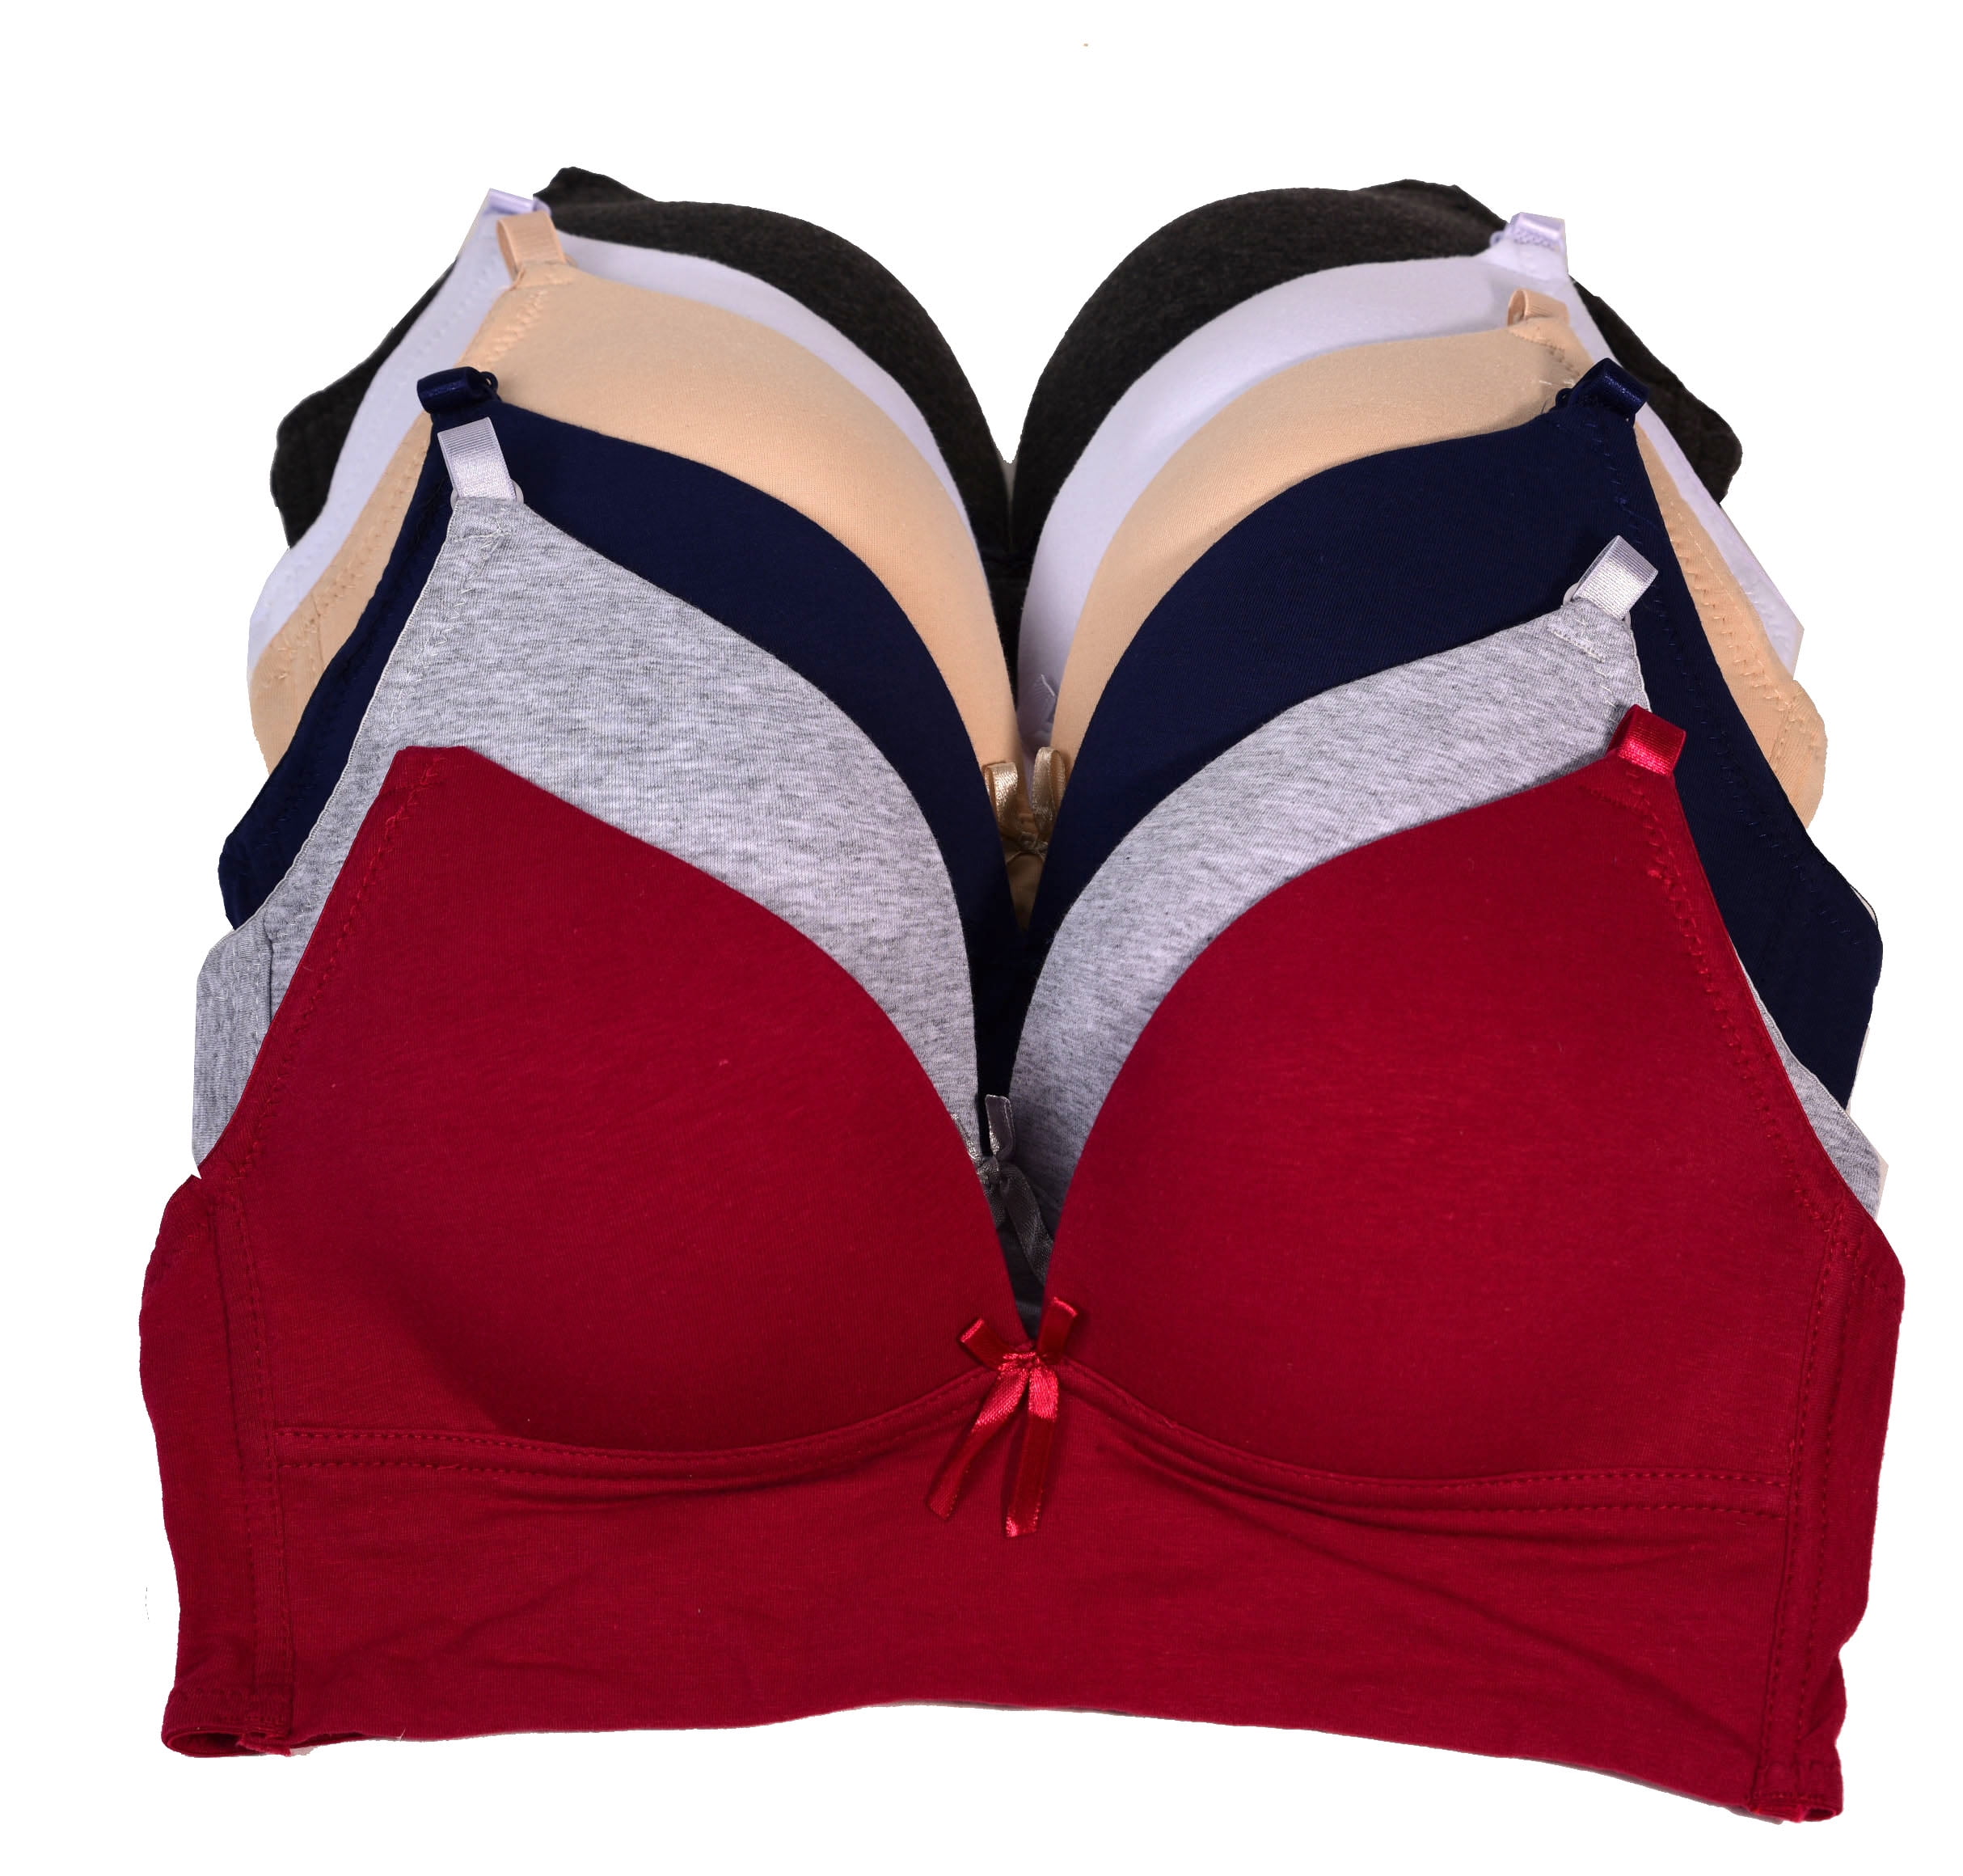 Women Bras 6 pack of No Wire Free Bra A cup B cup C cup 36B (S6703)